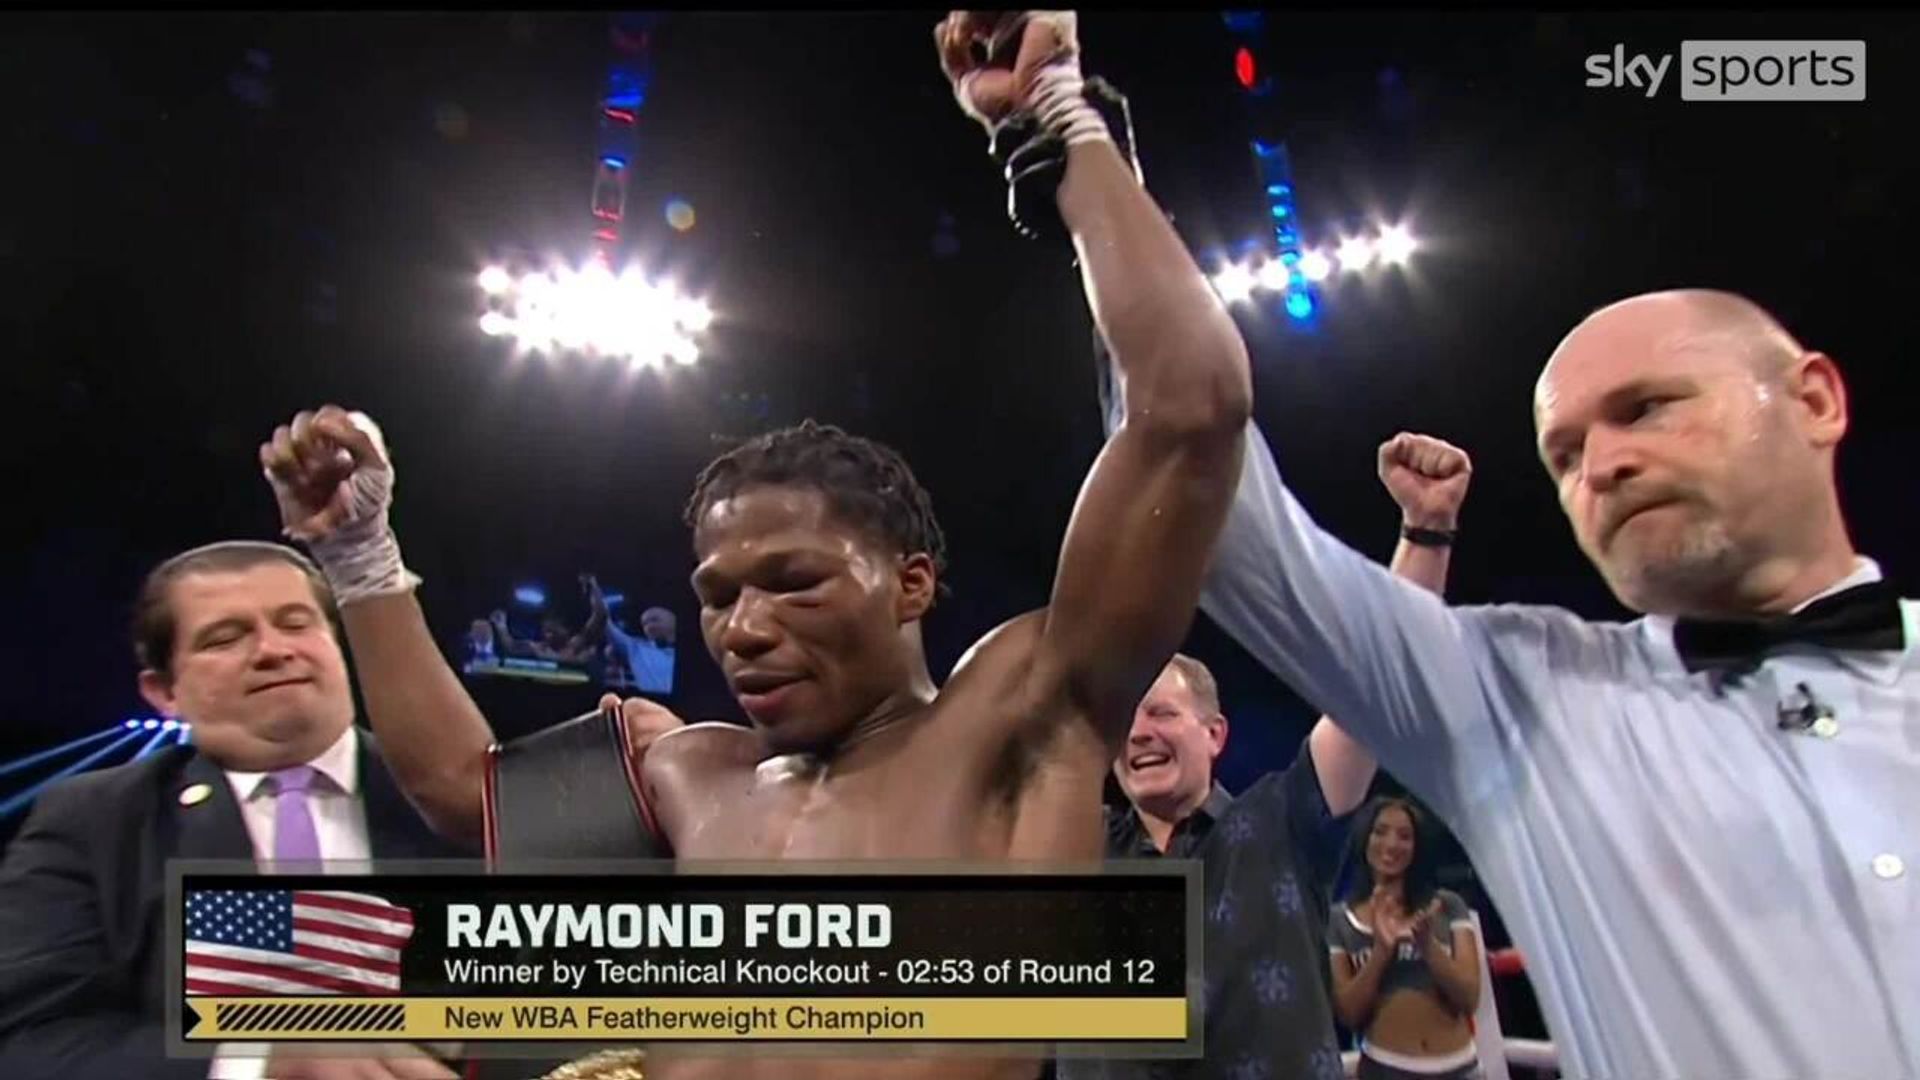 Miracle TKO in final ten seconds as Ford wins world title!